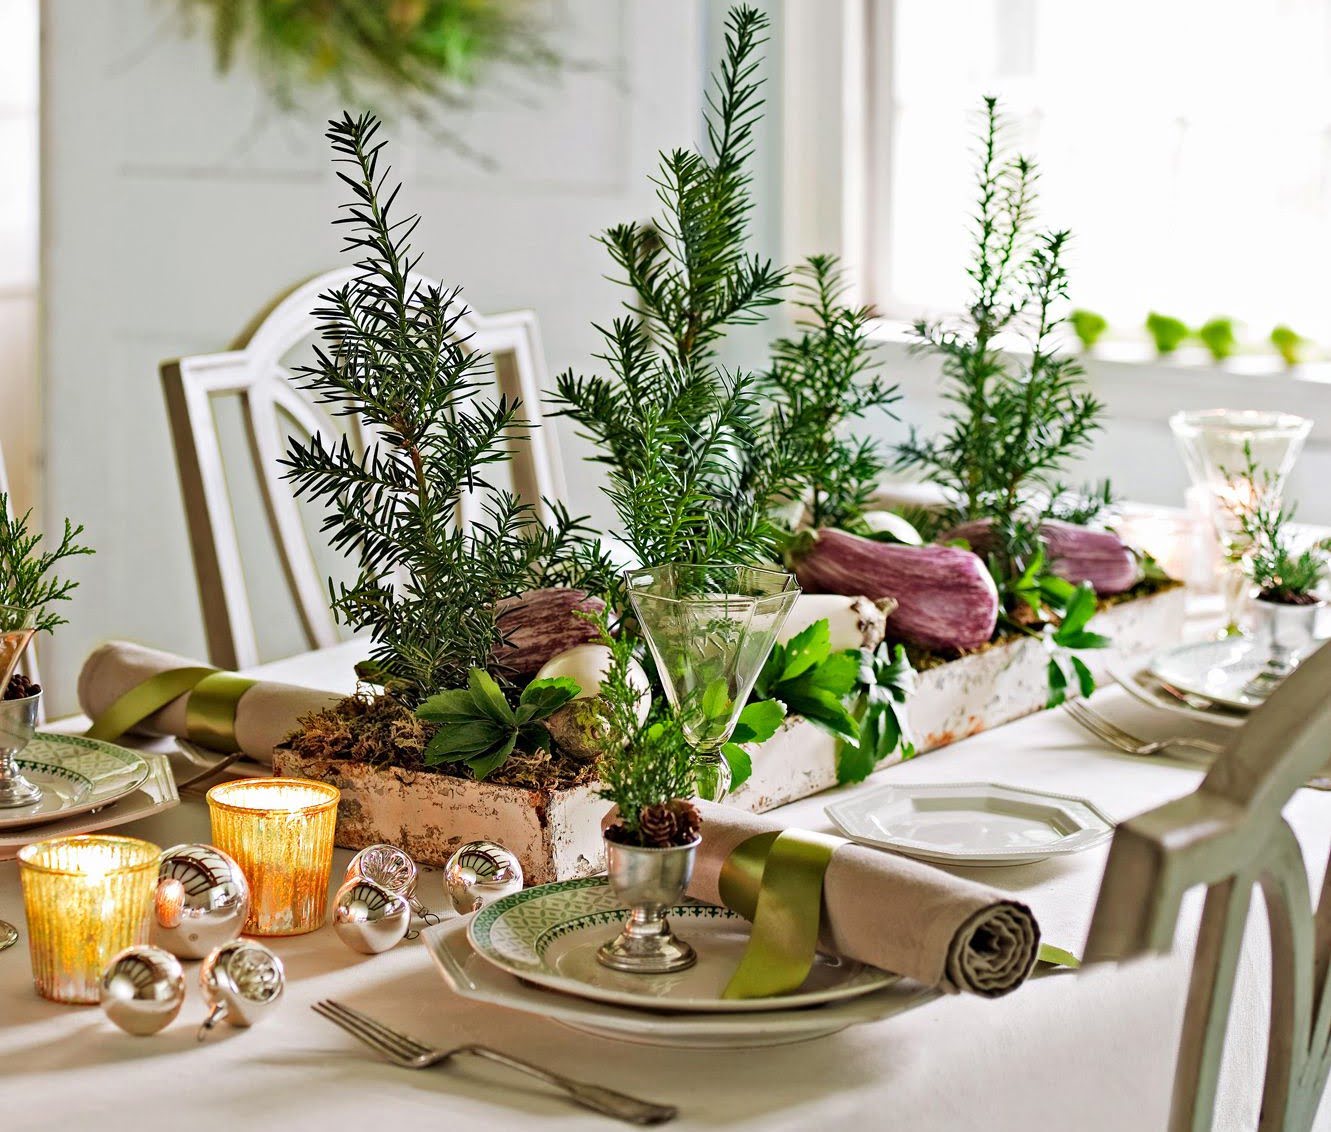 How To Make A Box Of Greens Table Centerpiece For Christmas